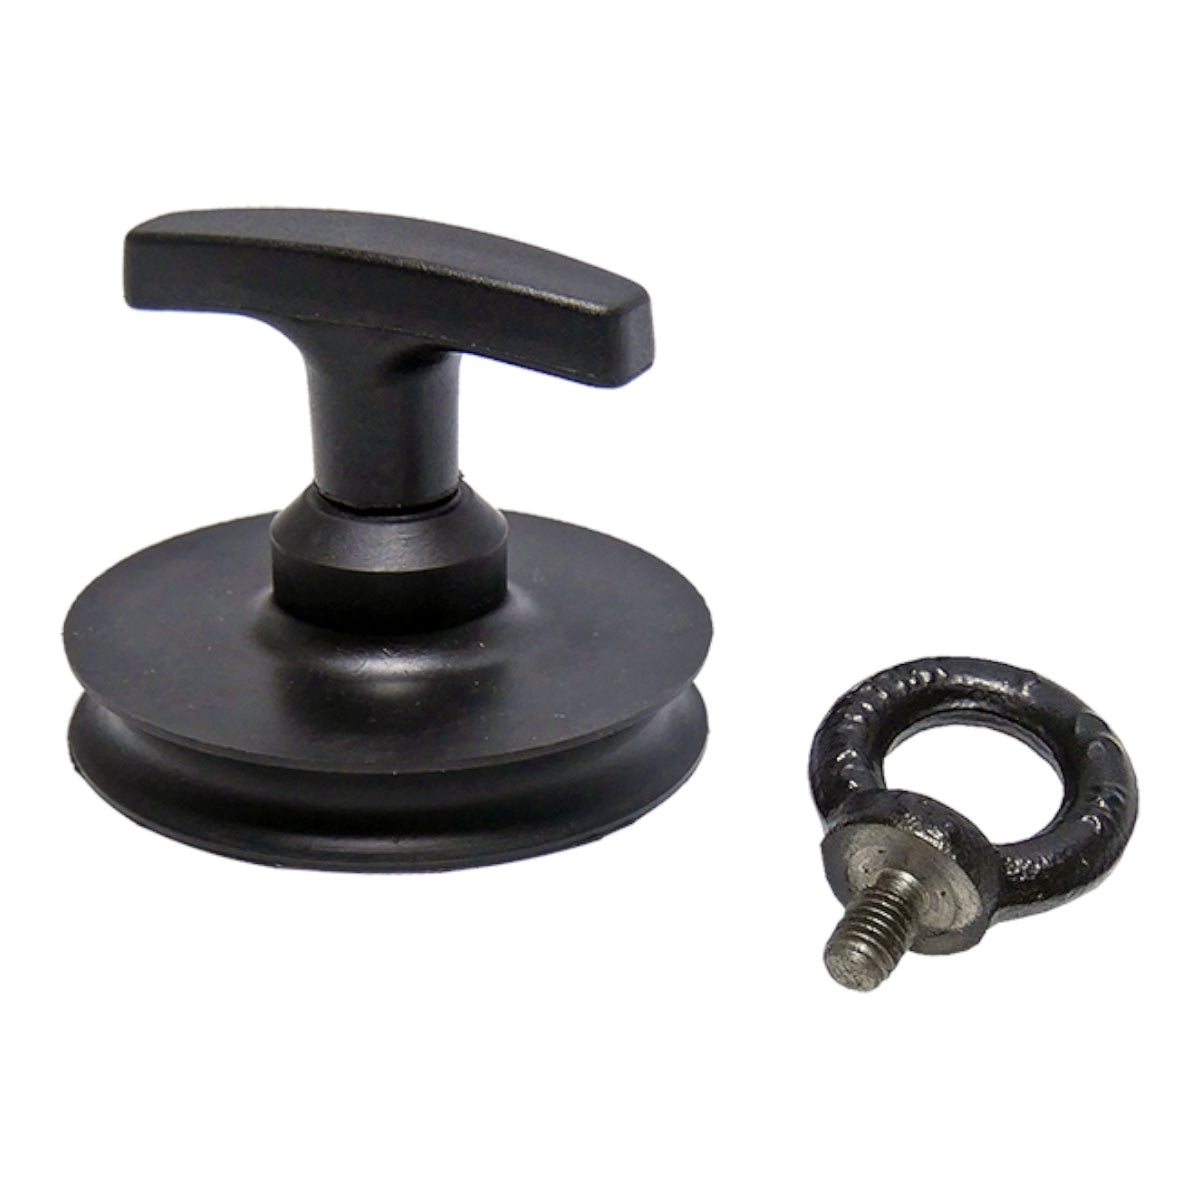 Suction lifter with T-handle and eyelet mounting aid for exterior mirrors